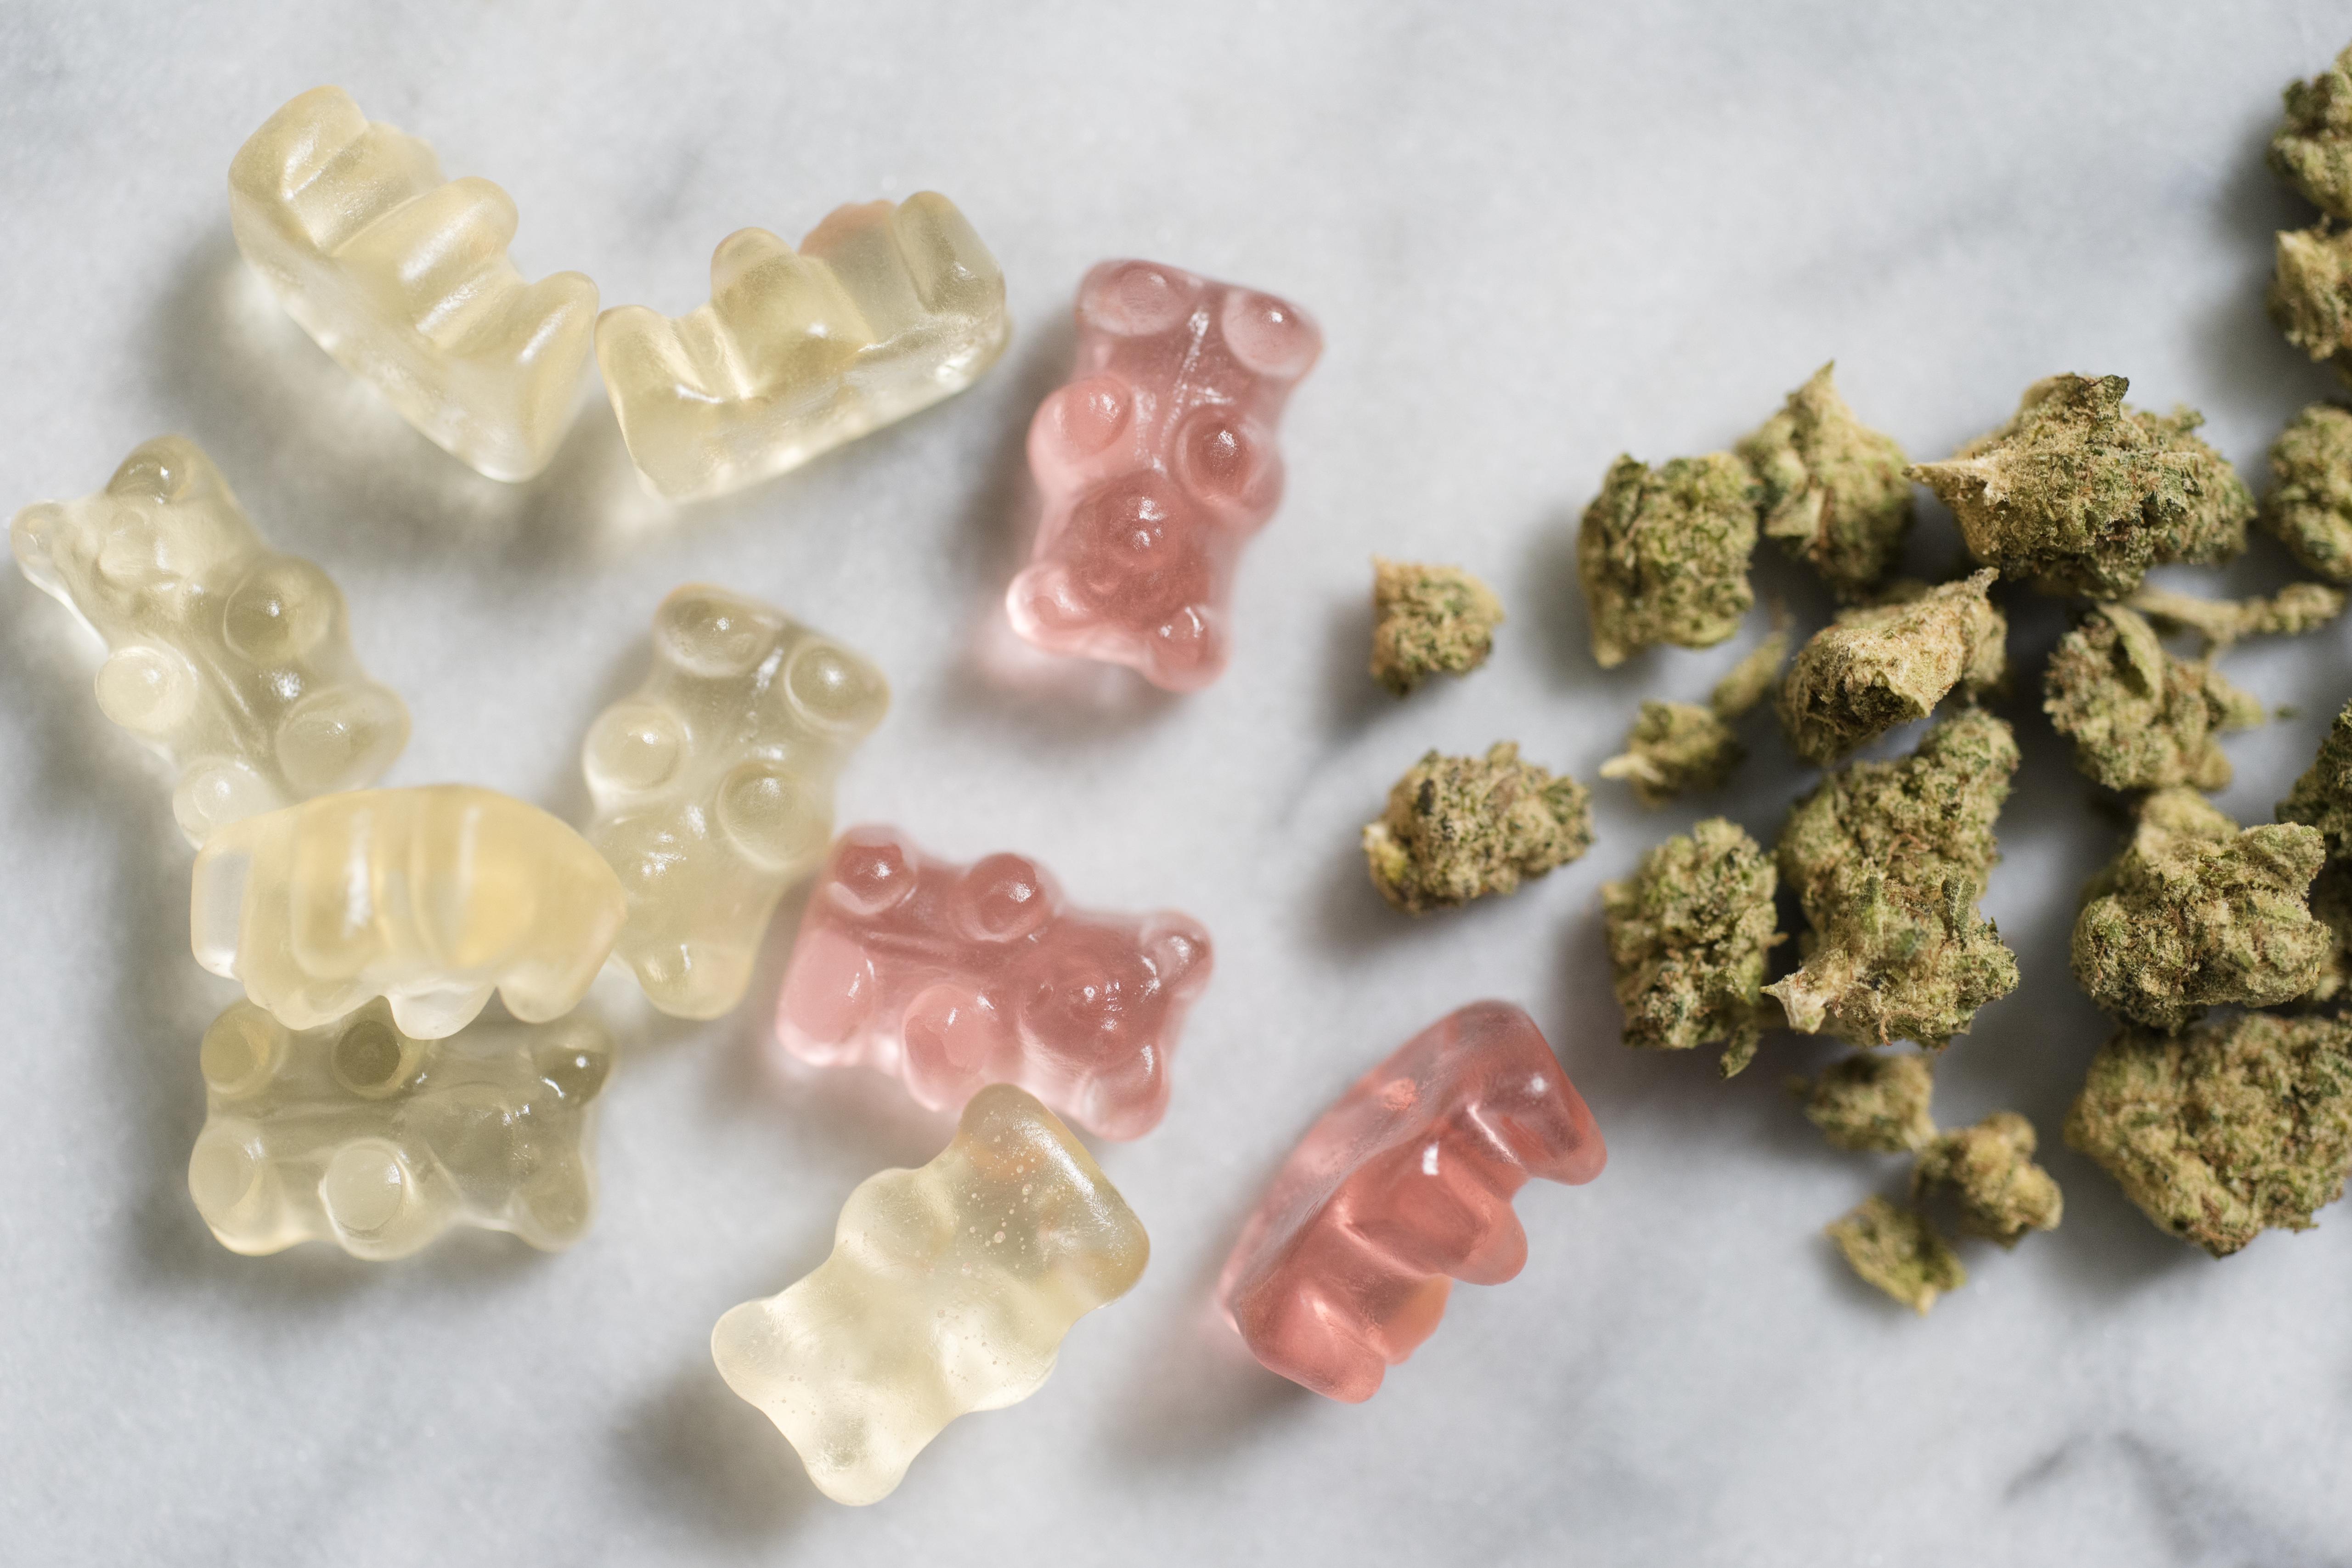 Gummy bears and cannabis scattered on a white marble counter.